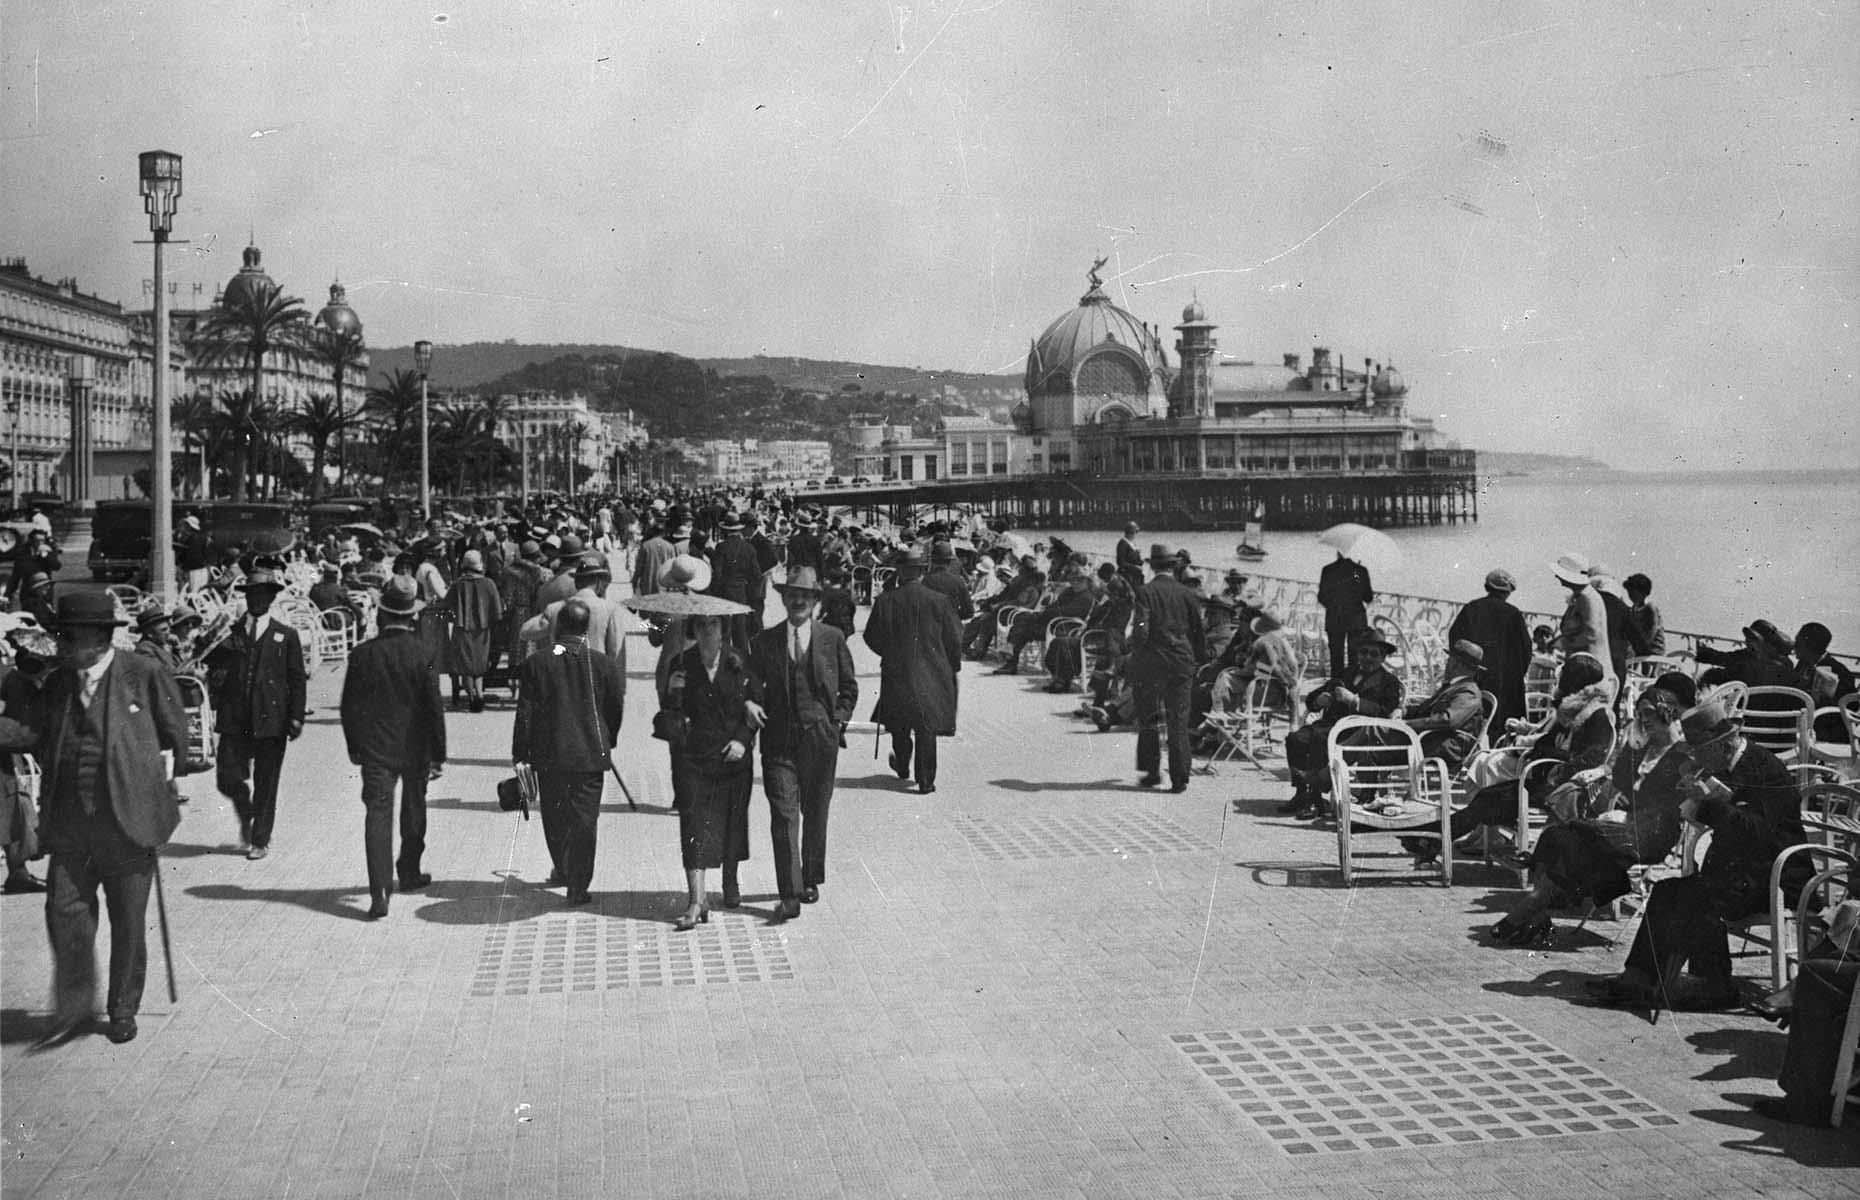 <p>Another French Riviera city, Nice, was equally en vogue, especially for aristocrats who preferred to escape the gloomy British winter and settle here until spring. Nice's popularity boomed even more following the refurbishment of the city's main seaside promenade, the Promenade des Anglais, in 1931. In this image, captured shortly after its opening, people are seen enjoying a casual stroll, with the stunning Casino de la Jetée in the background. Sadly, the casino was stripped of all its metals for the German war effort during the Second World War and destroyed.</p>